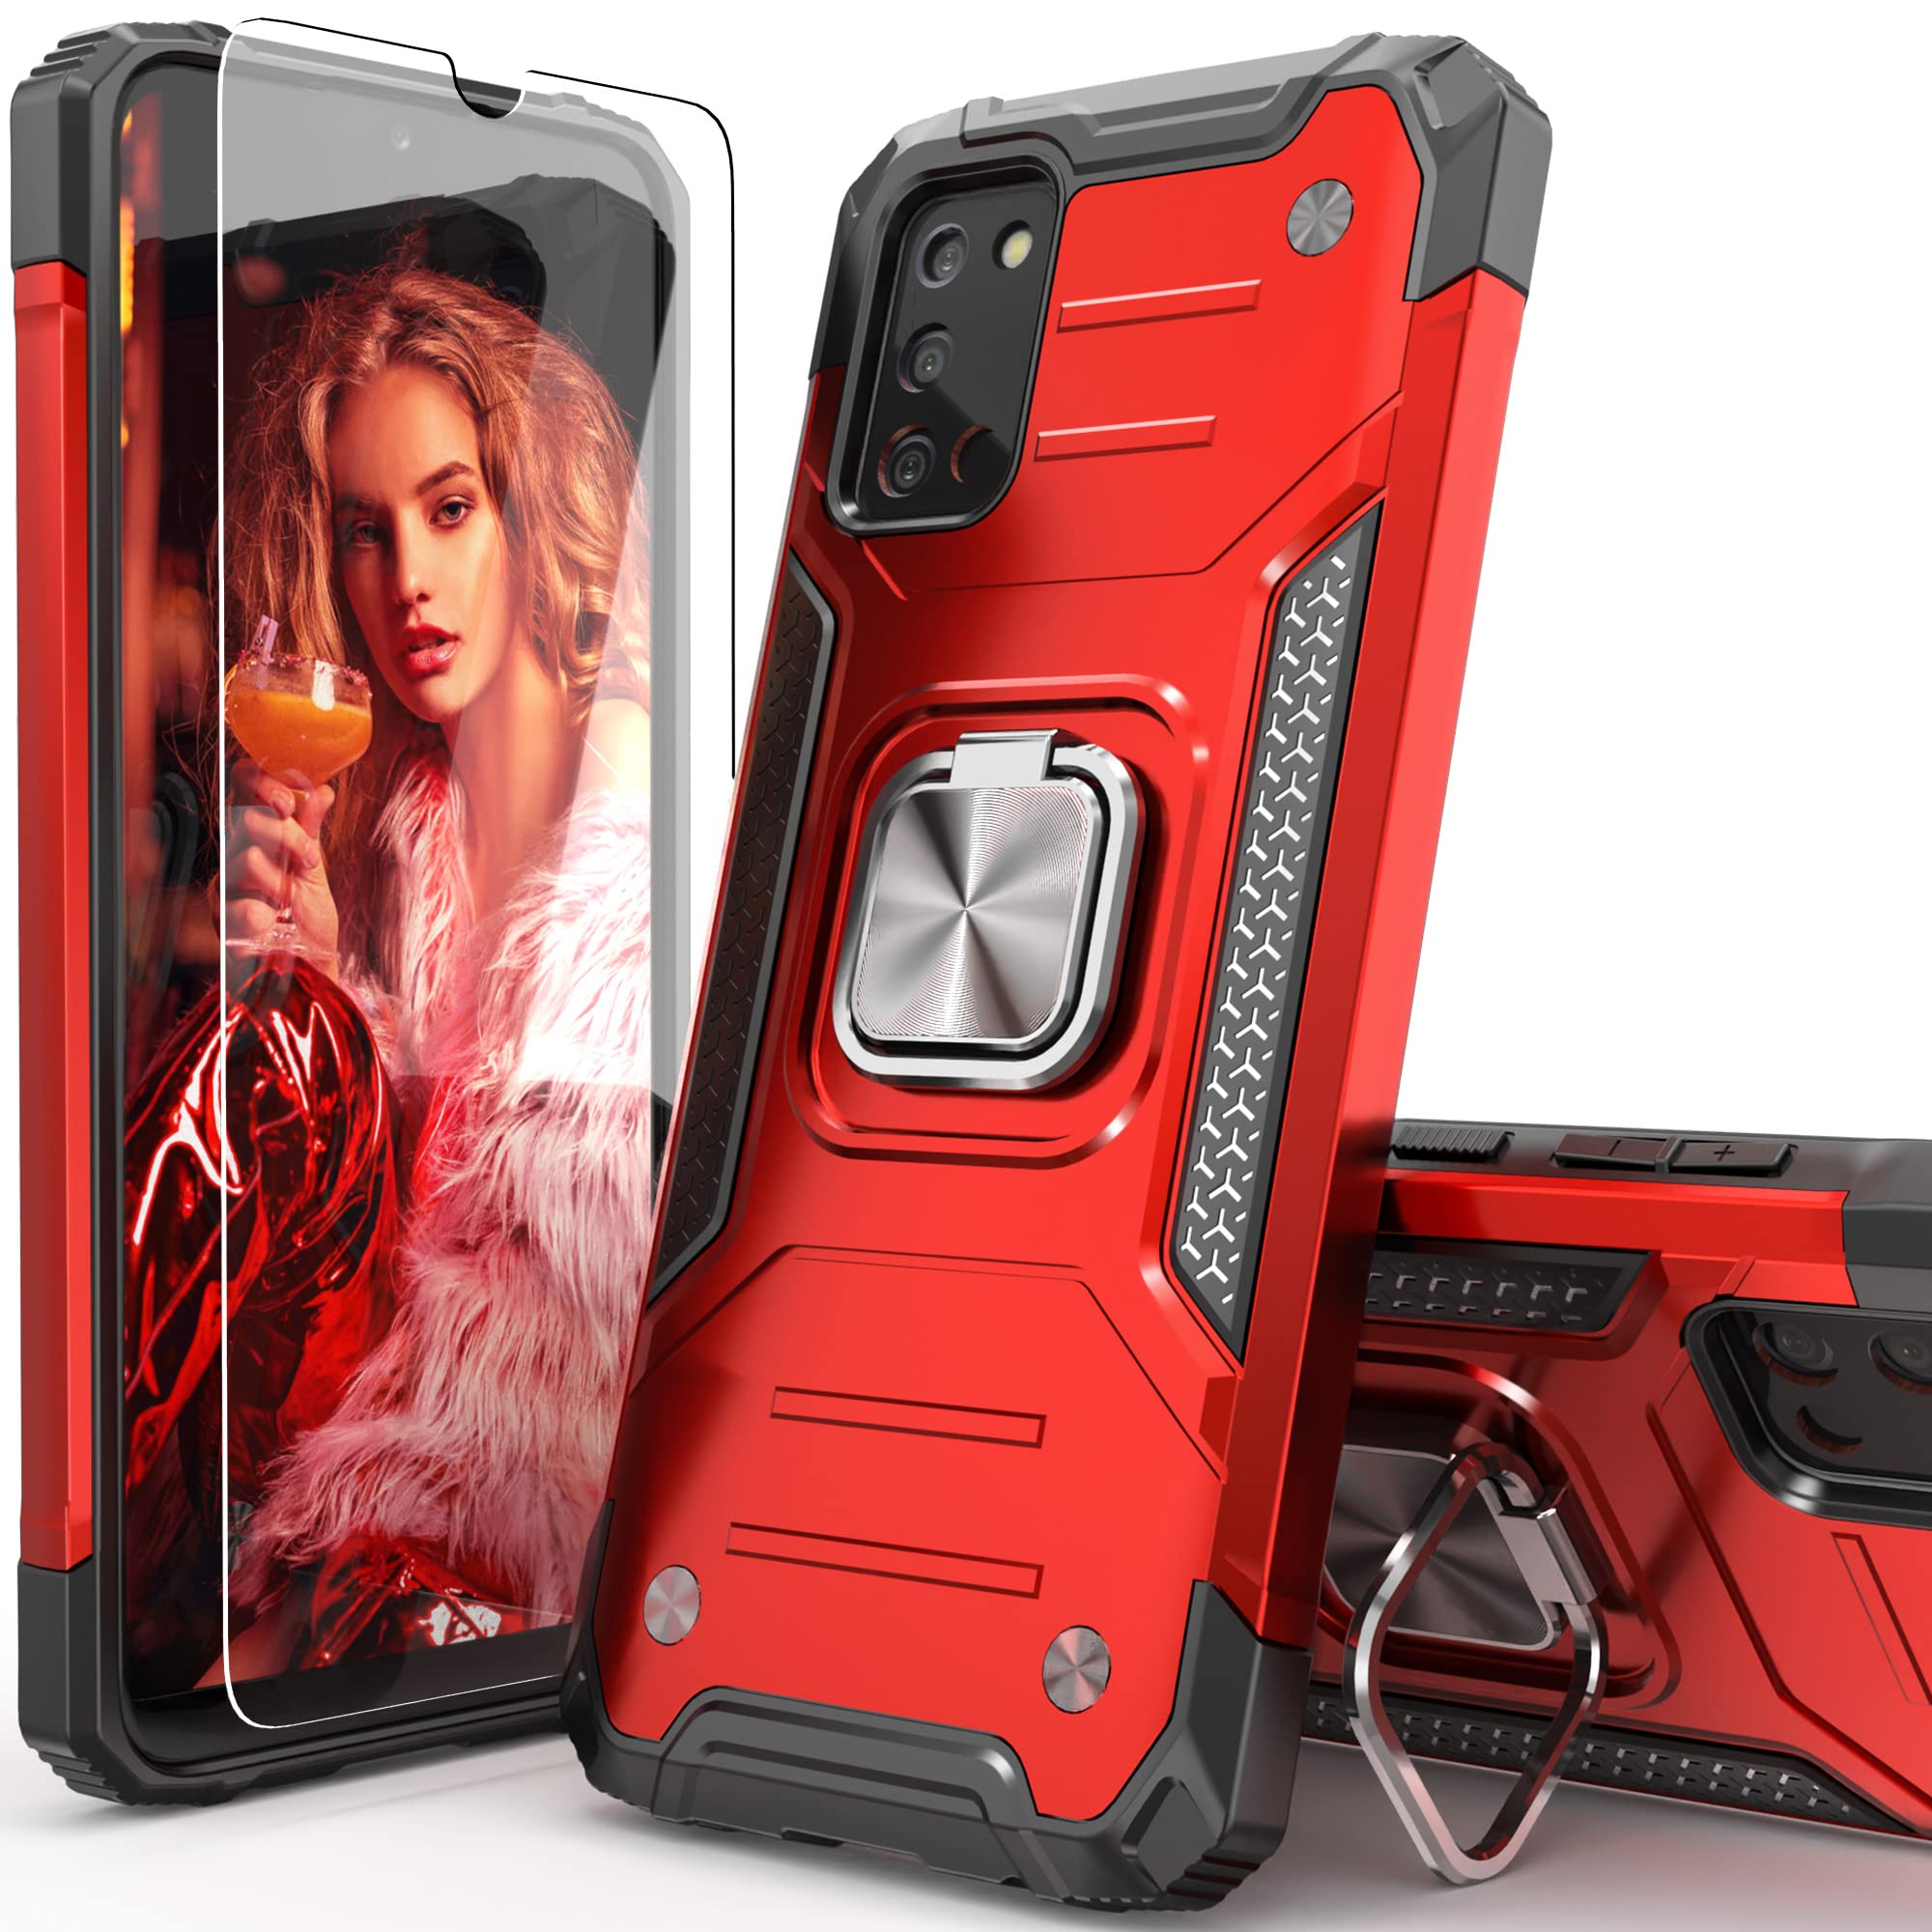 IDYStar Galaxy A02S Case with Screen Protector,Galaxy A02S Case,Shock Absorption Heavy Duty Drop Test Slim Cover with Car Mount Kickstand Lightweight Protective Phone Case for Samsung Galaxy A02S, Red